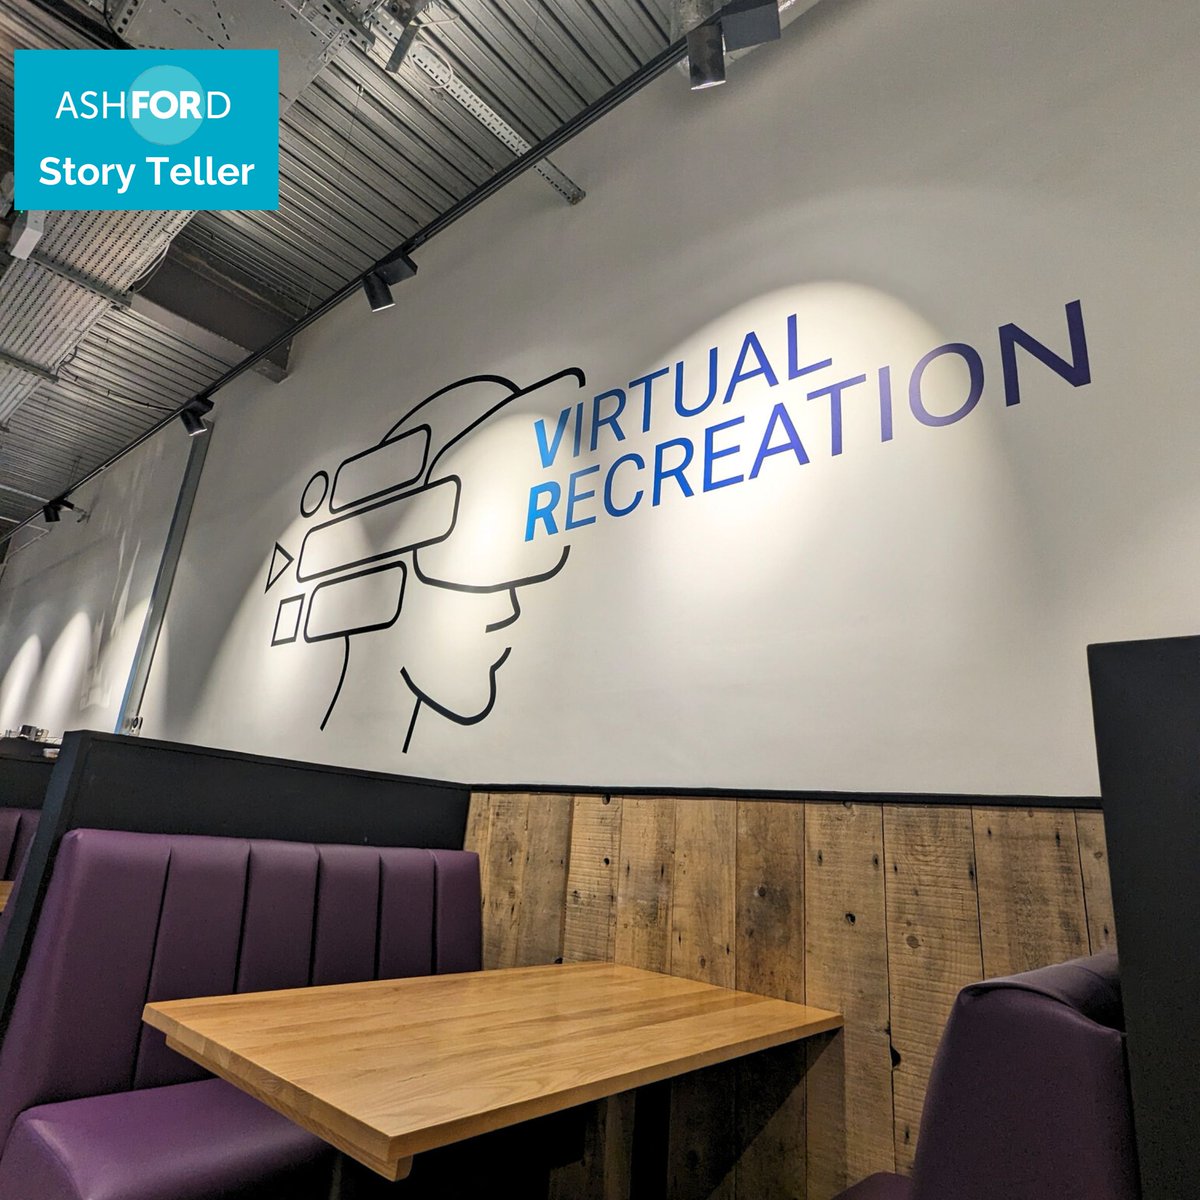 Virtual Recreation is Ashford's very first VR gaming experience business. Discover why owner, Jackie Dawes, decided to invest her business in Ashford town centre: orlo.uk/XcQfB